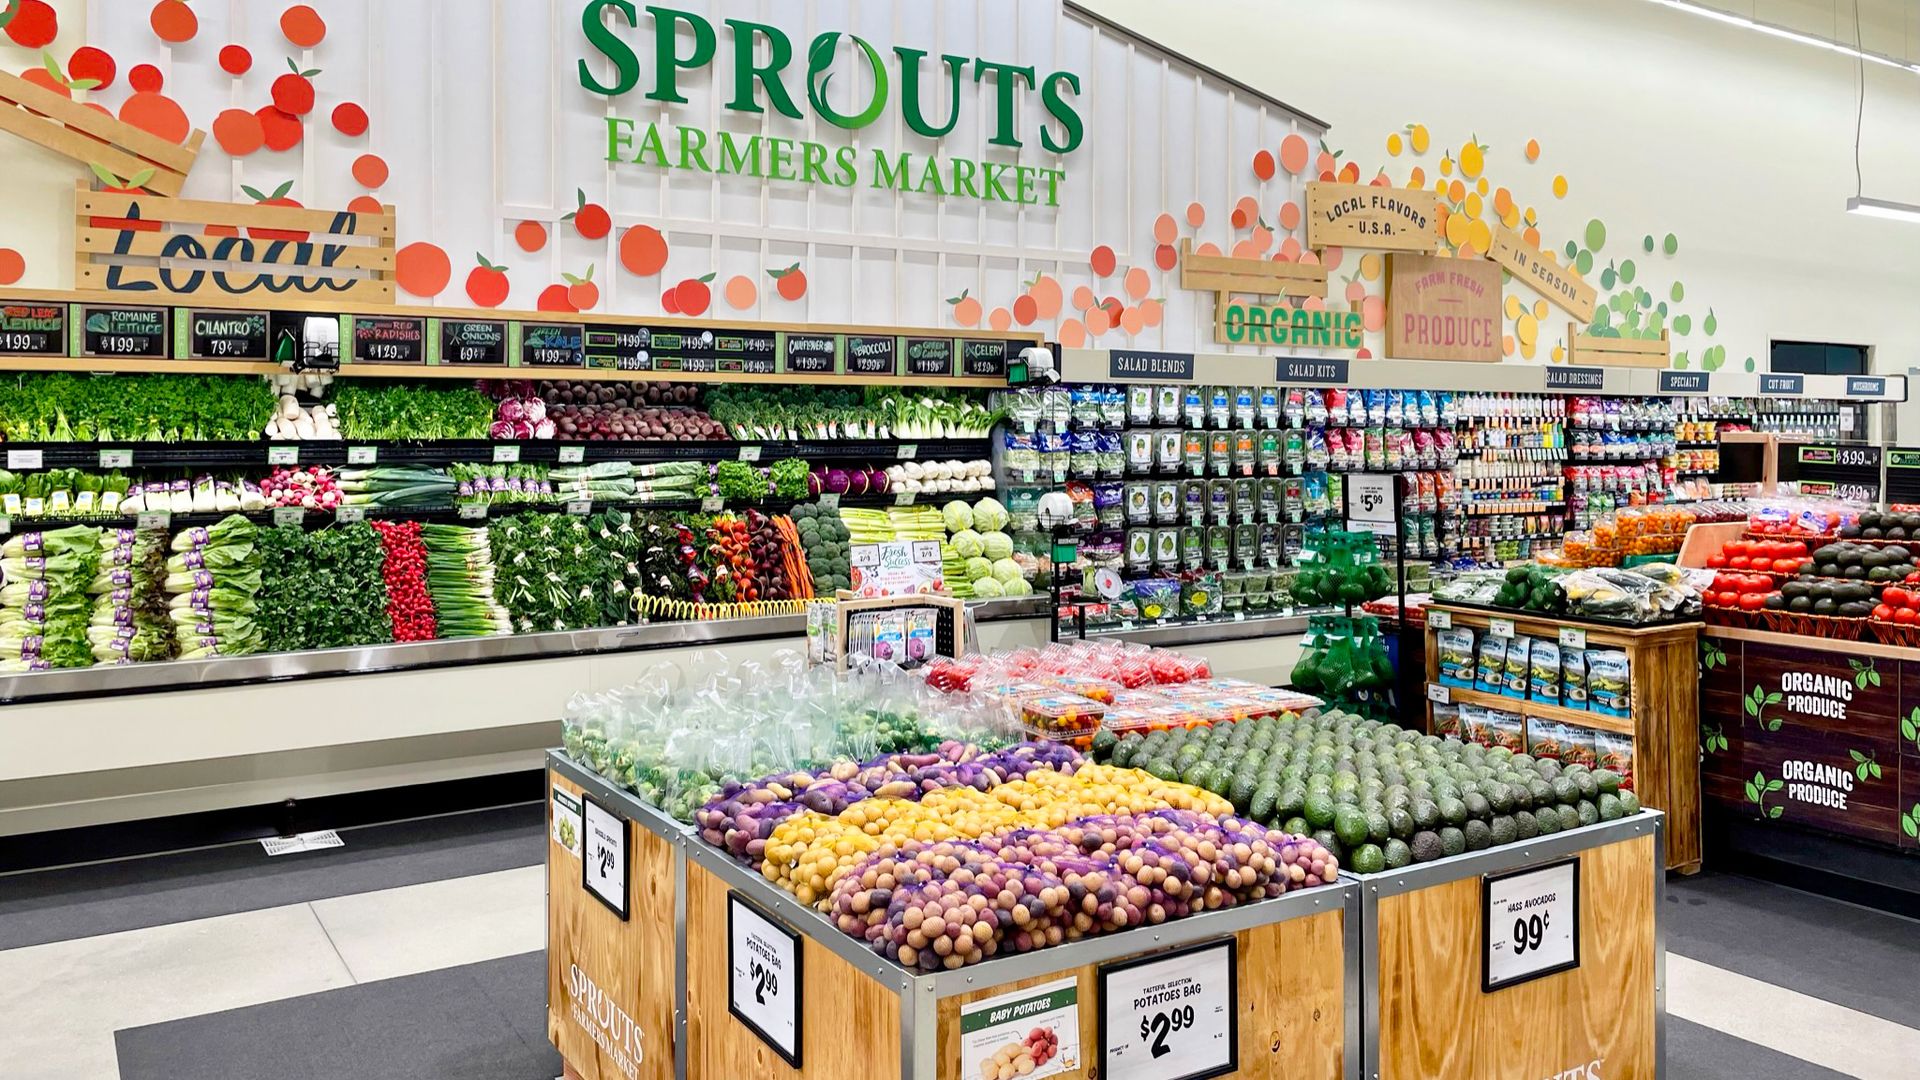 A Sprouts store produce section